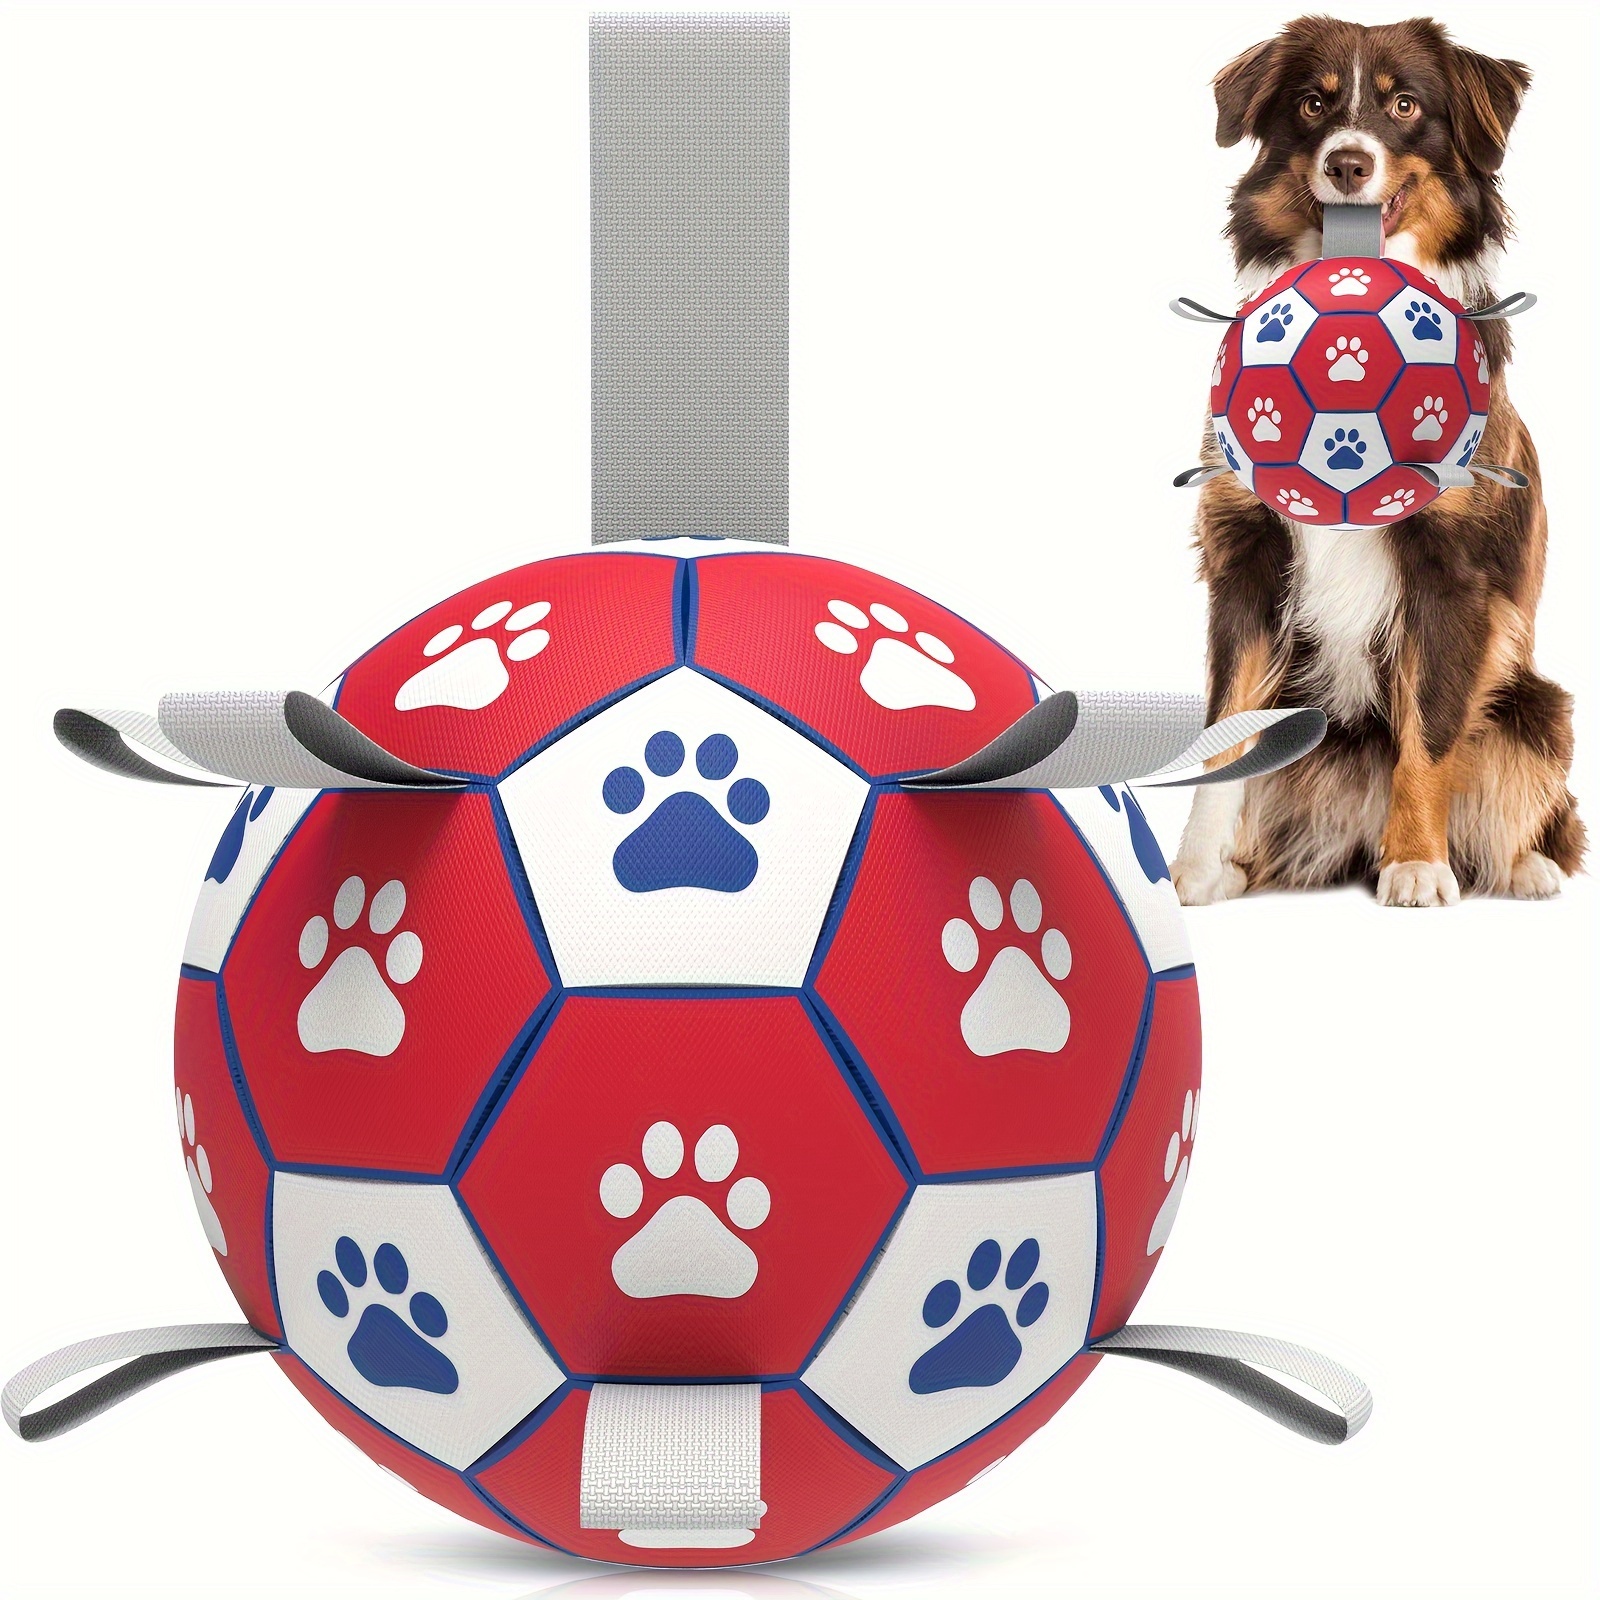 

1pc Durable Football Design Pet Toy With Straps, Dog Chewing Ball Toy For Training Playing Teeth Cleaning, Interactive Fetch Pet Toy For Small Medium Large Dogs